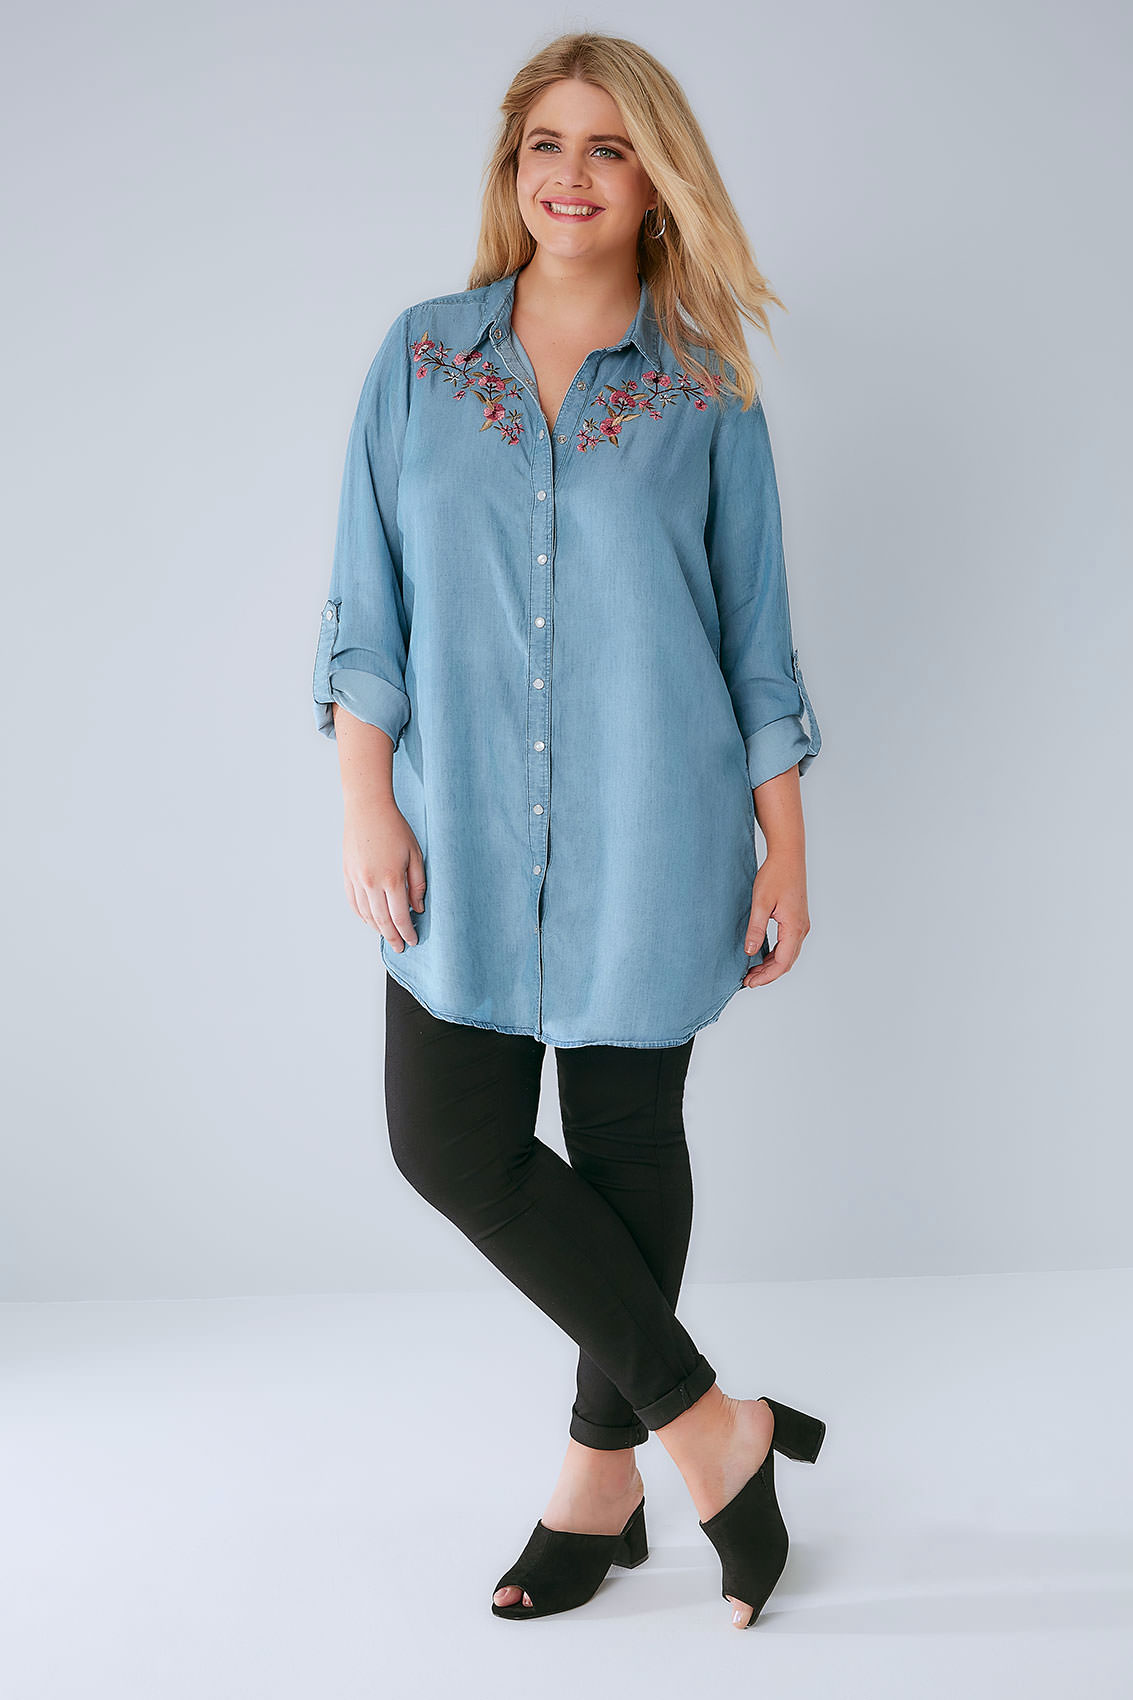 WOMENS DENIM LONGLINE Shirt With Floral Embroidery, Plus Size 16 To 36 ...